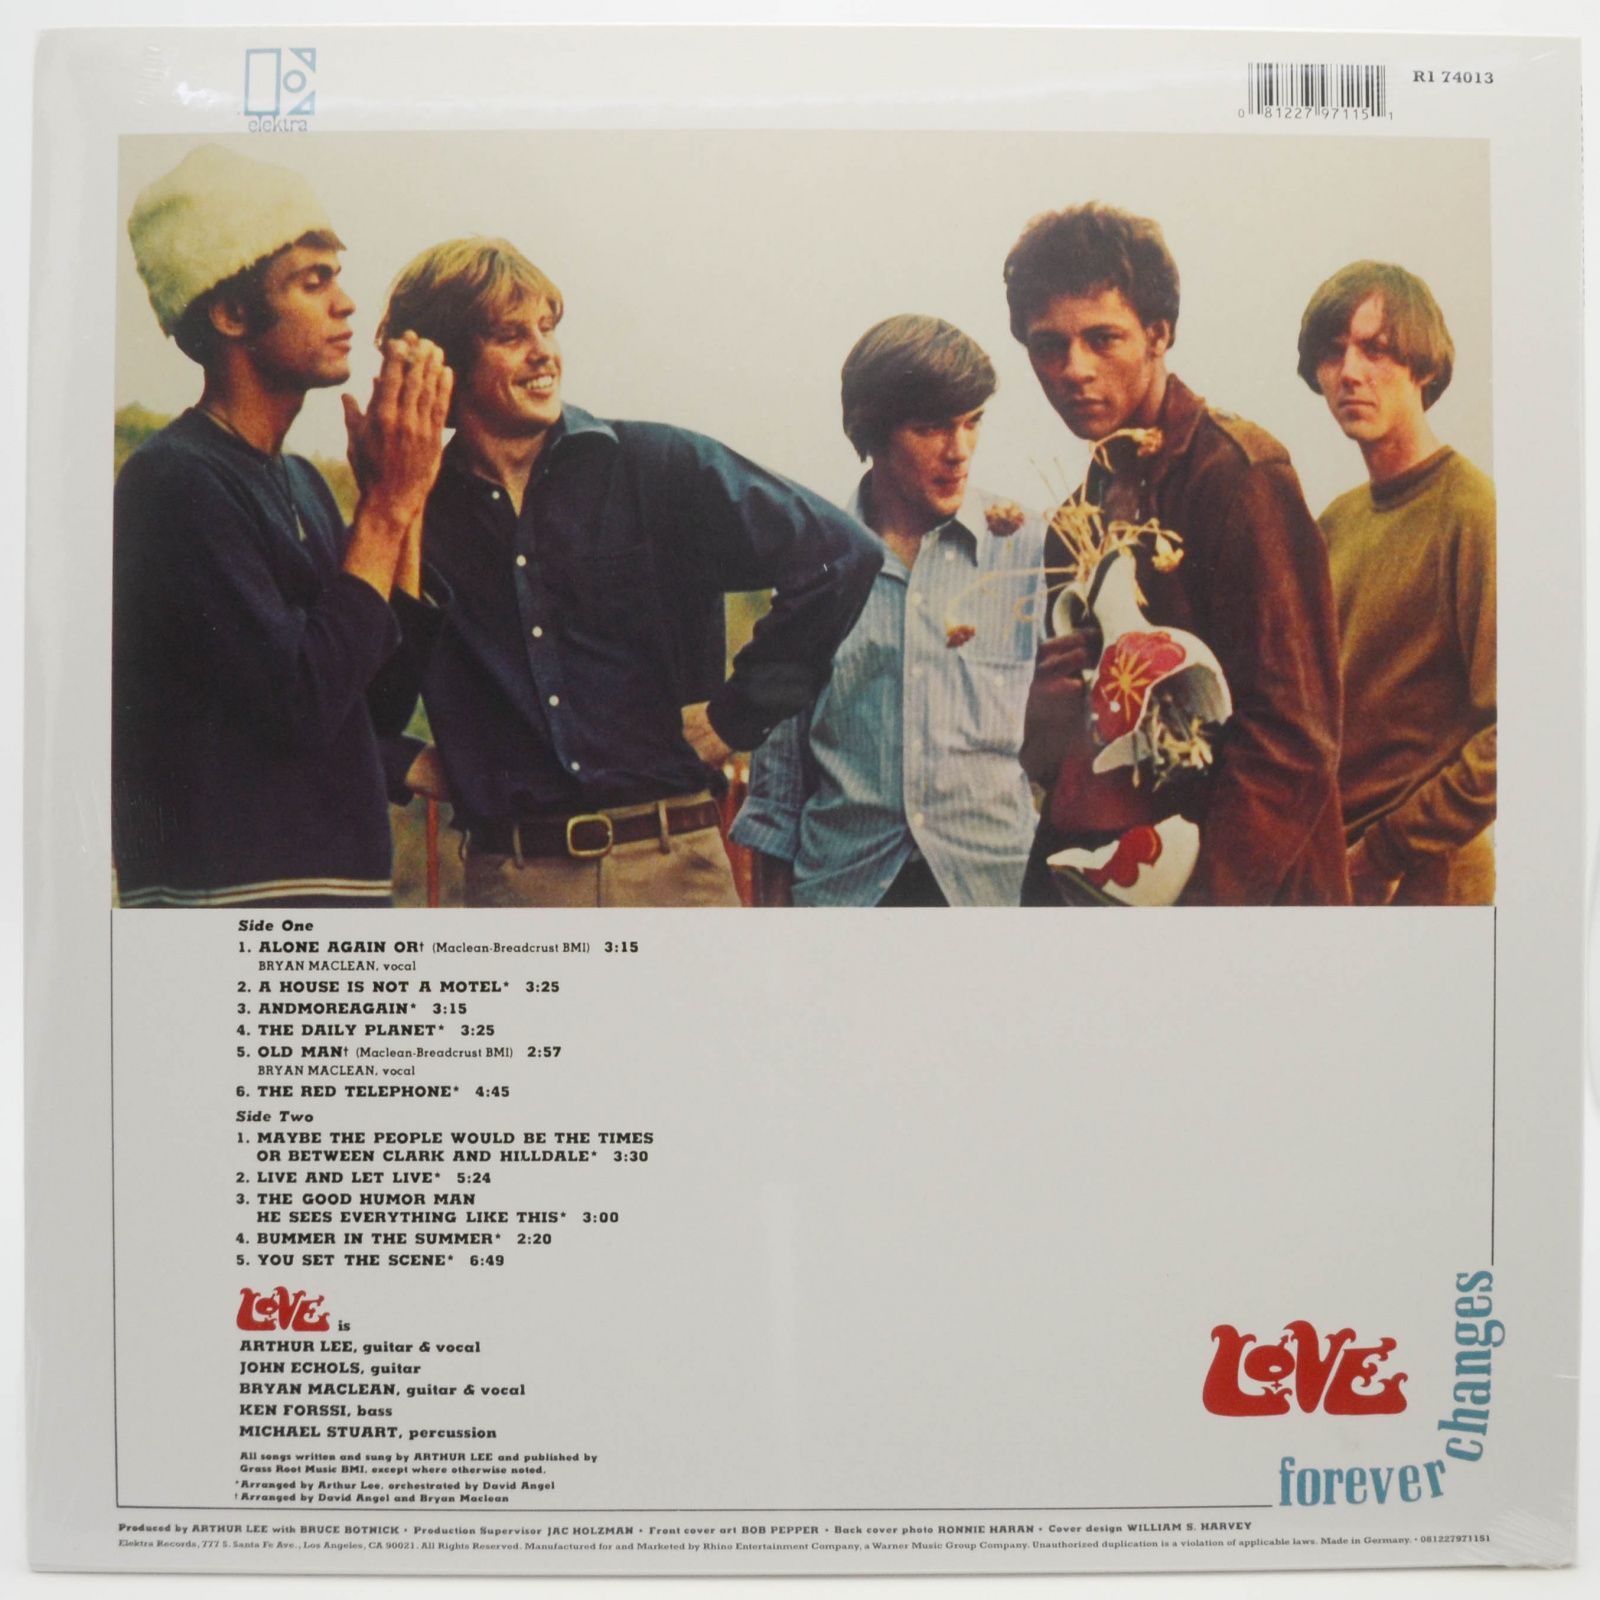 Love — Forever Changes, 1967